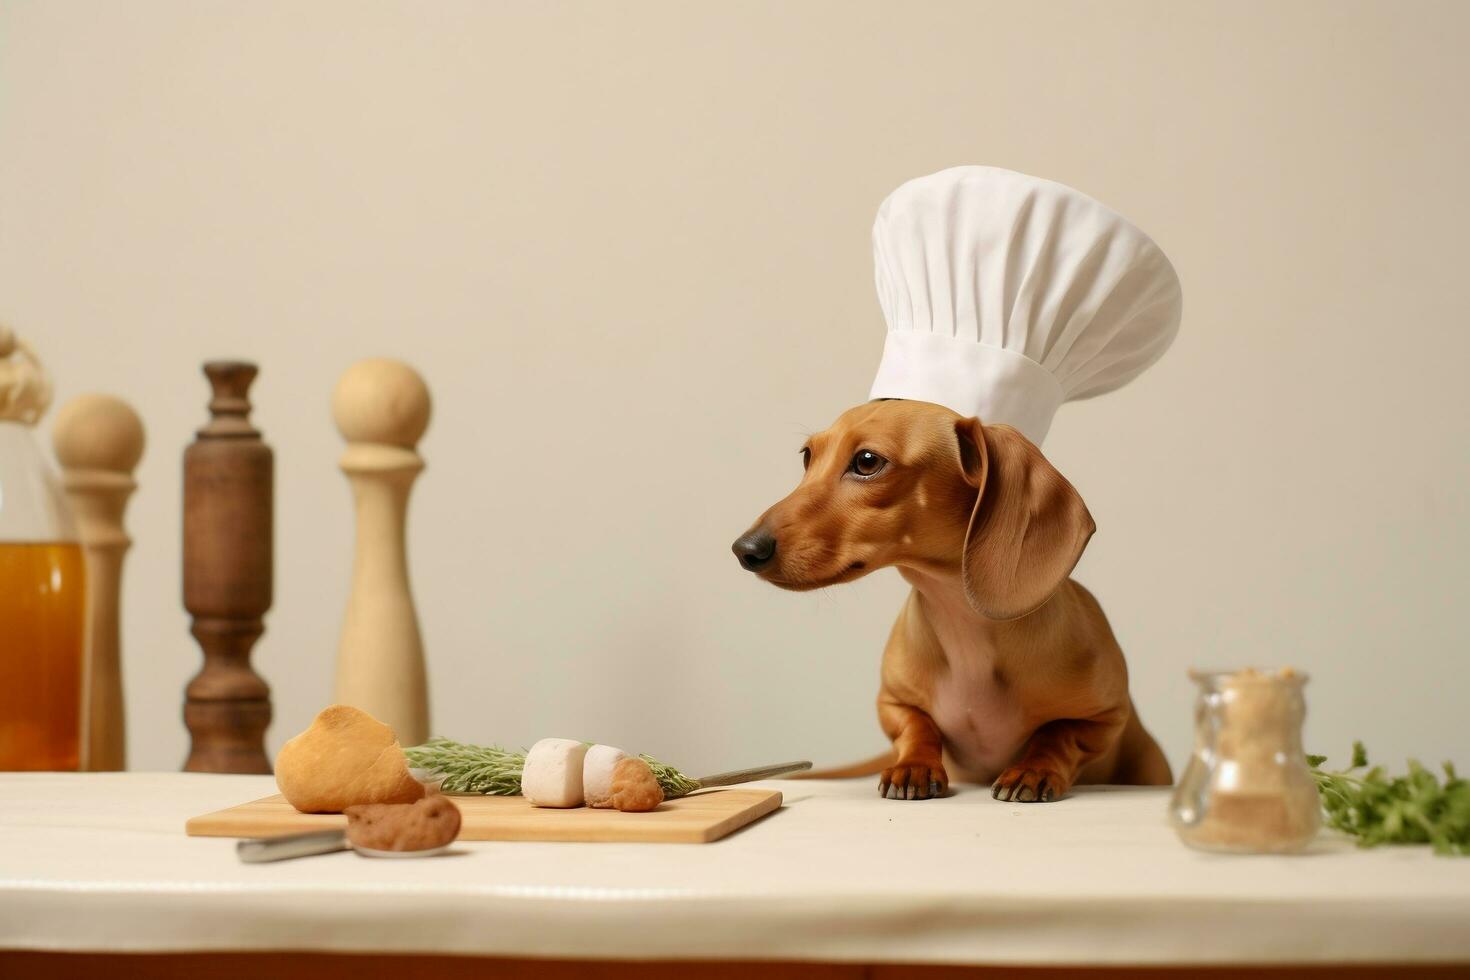 A cute brown dachshund dog wearing a cook cap sitting in front of a kitchen table filled with ingredients for cooking photo